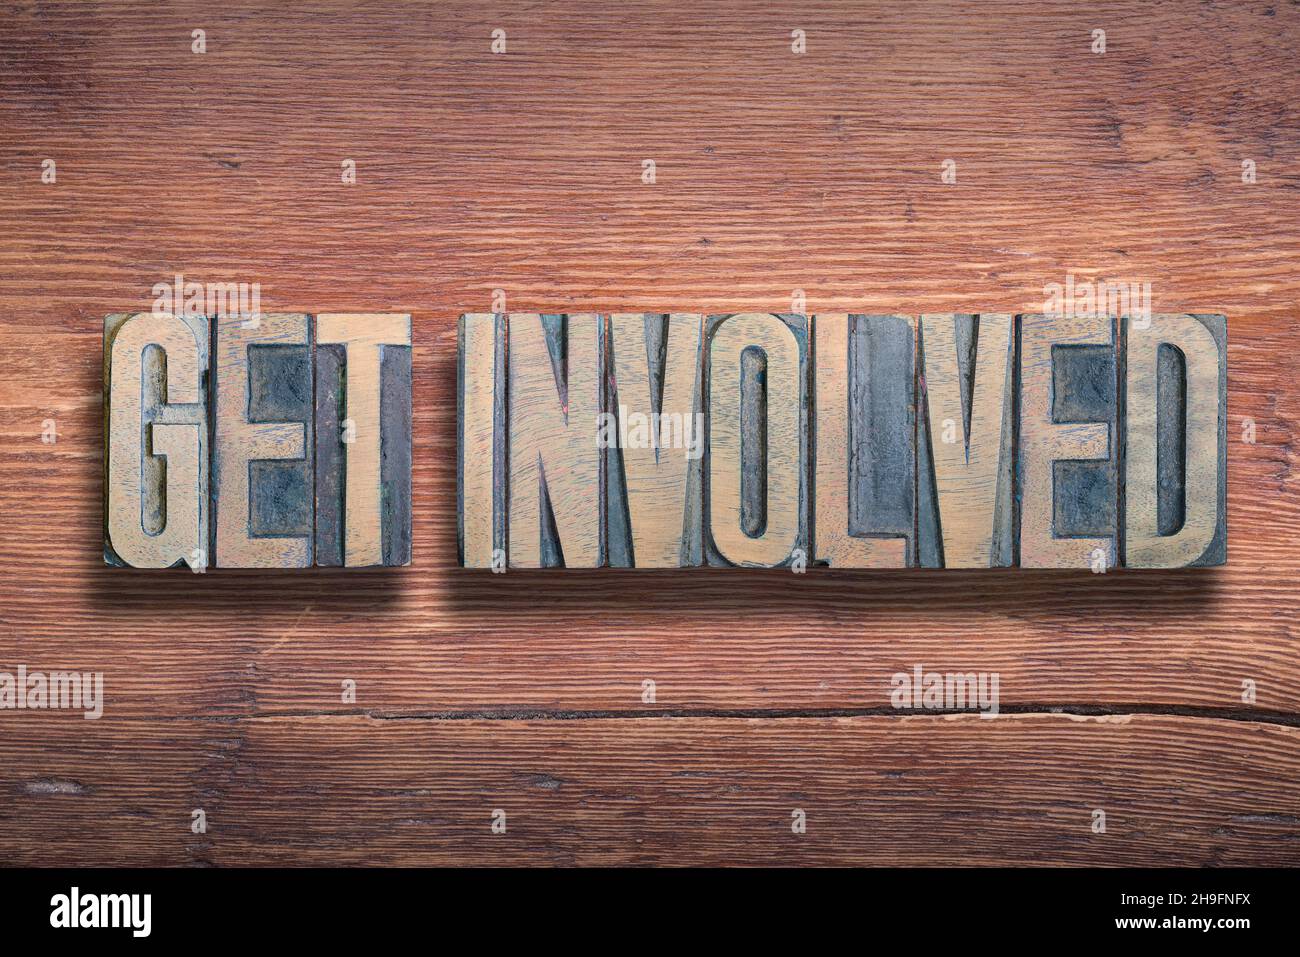 get involved phrase combined on vintage varnished wooden surface Stock Photo